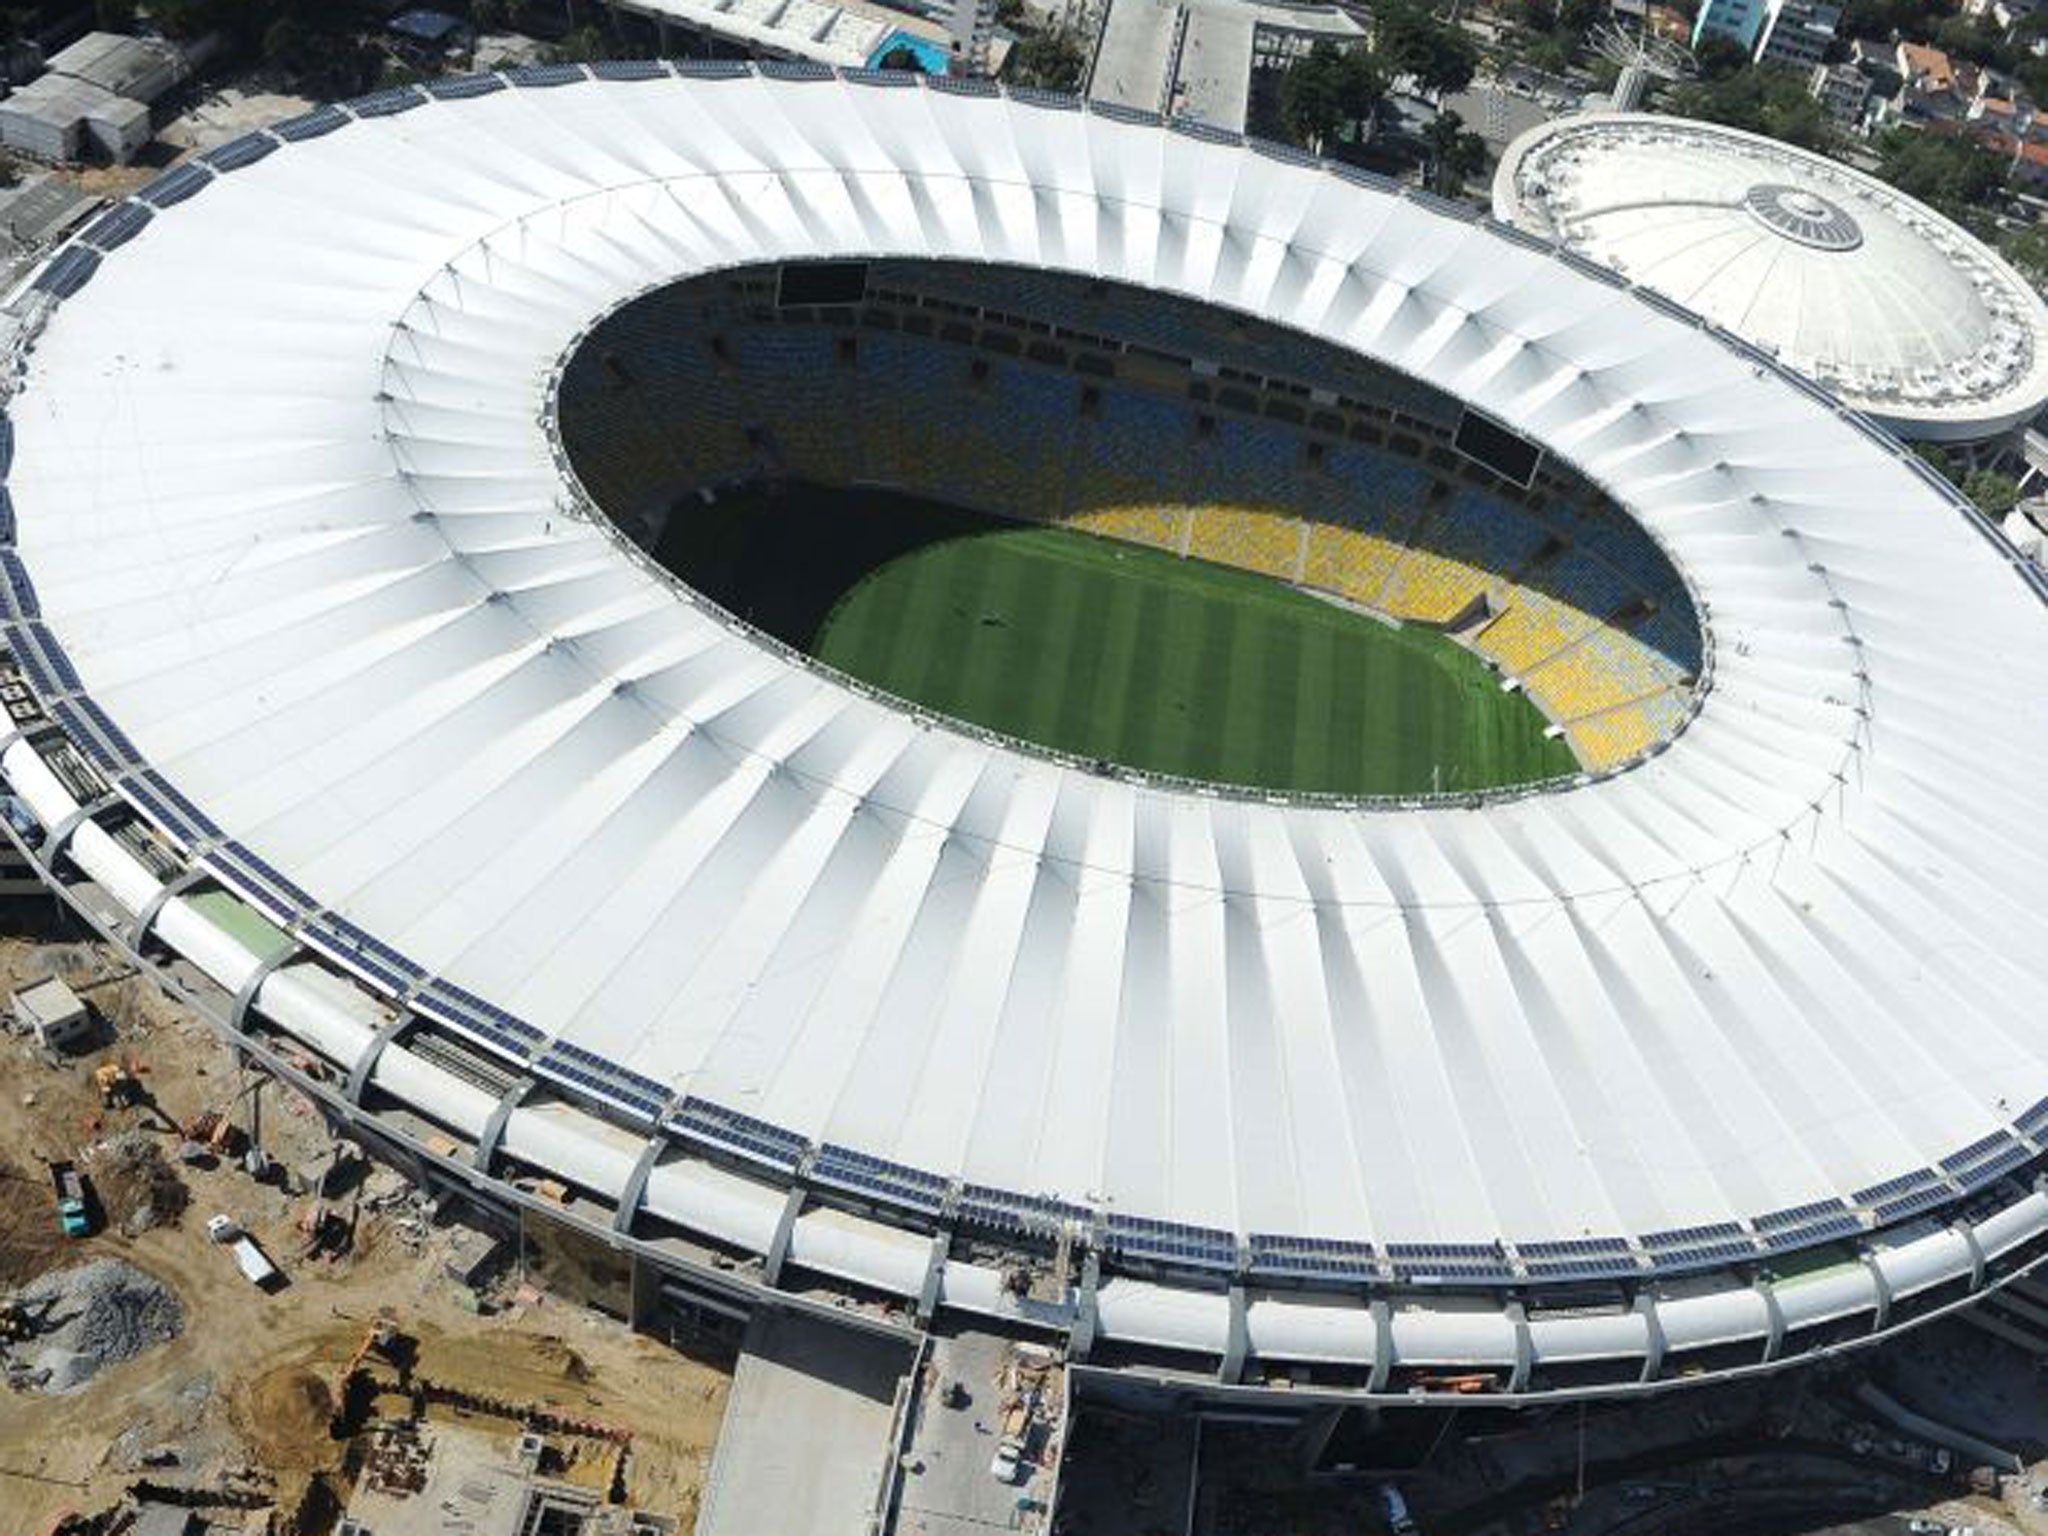 A view of The Maracana